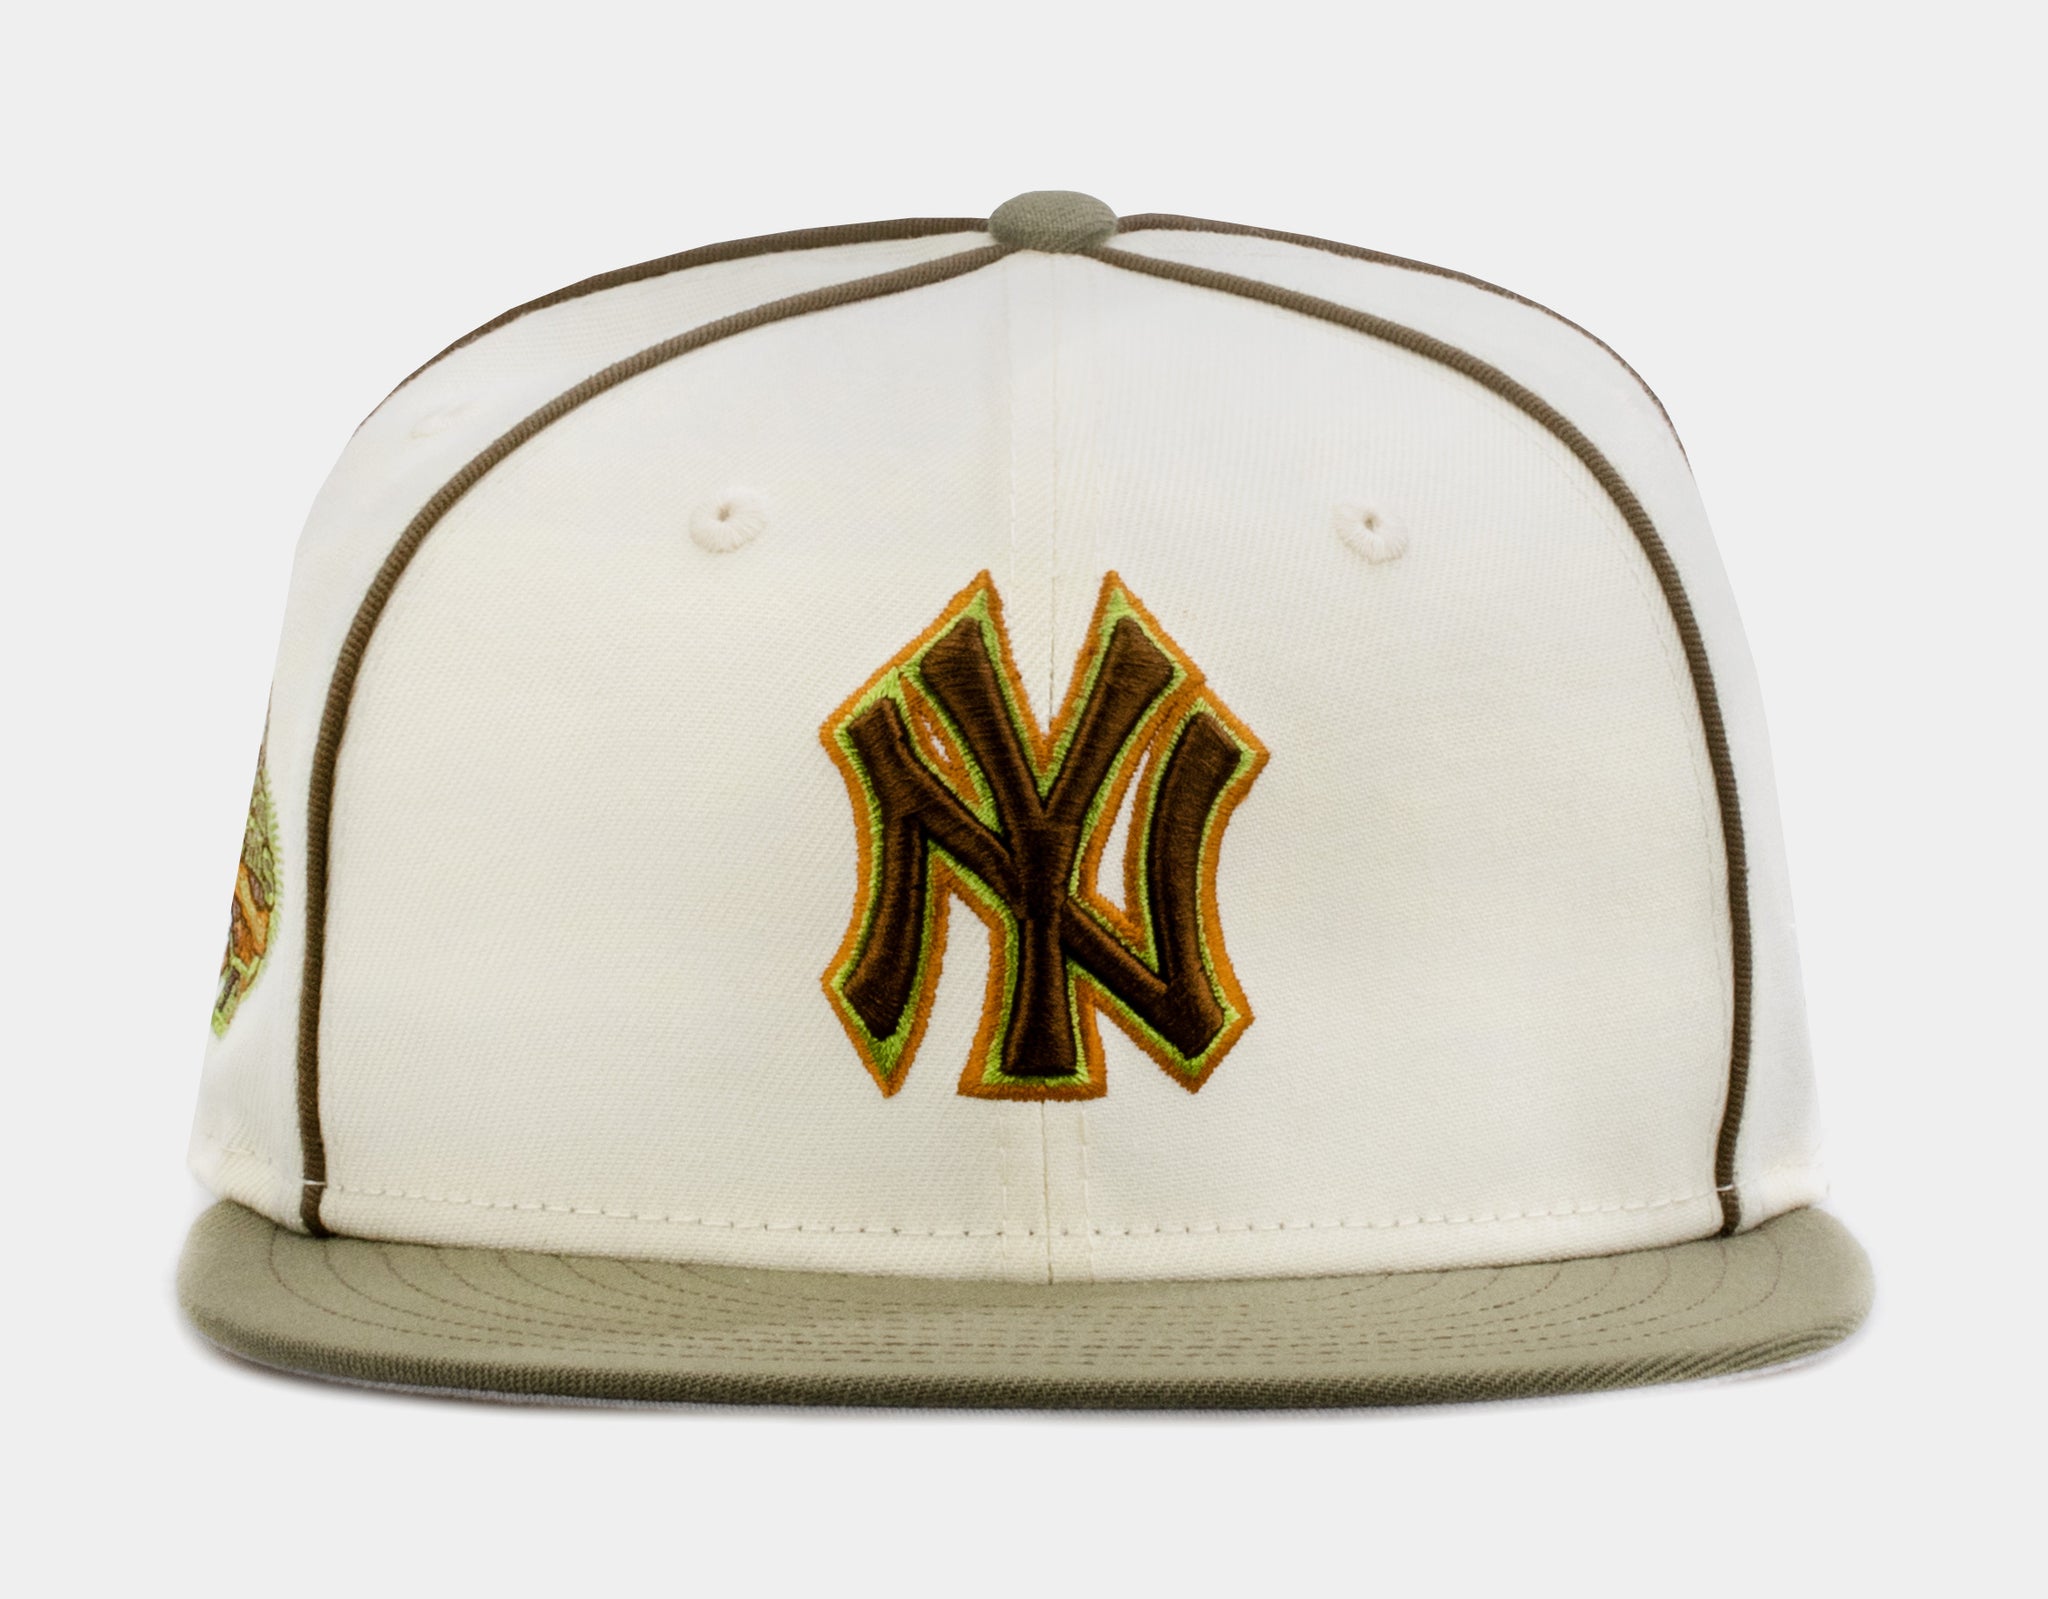 New Era Shoe Palace Exclusive San Diego Padres Camo 59FIFTY Mens Hat (Camo Green/Black)